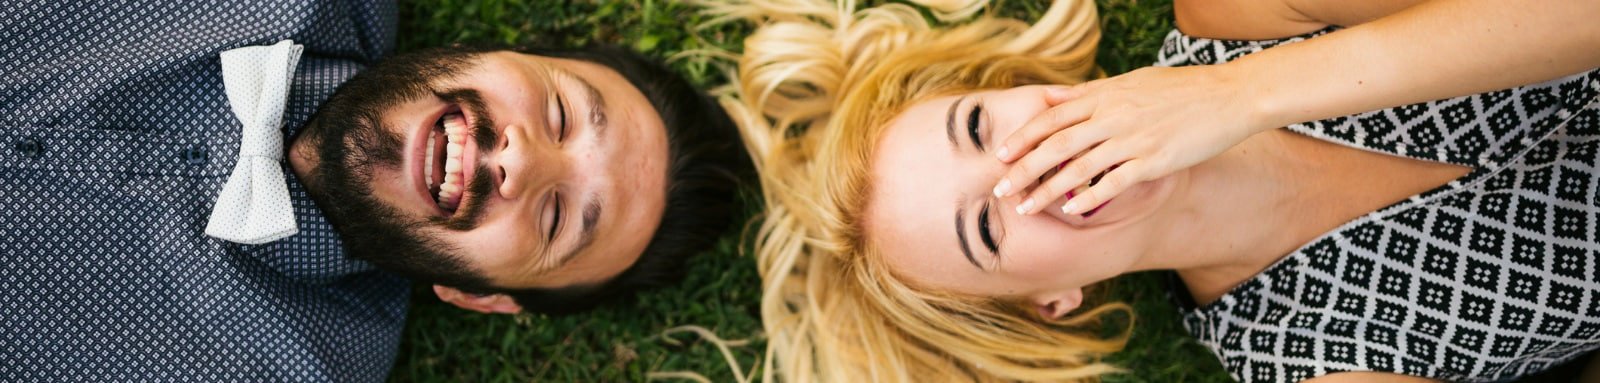 Couple lying on grass laughing